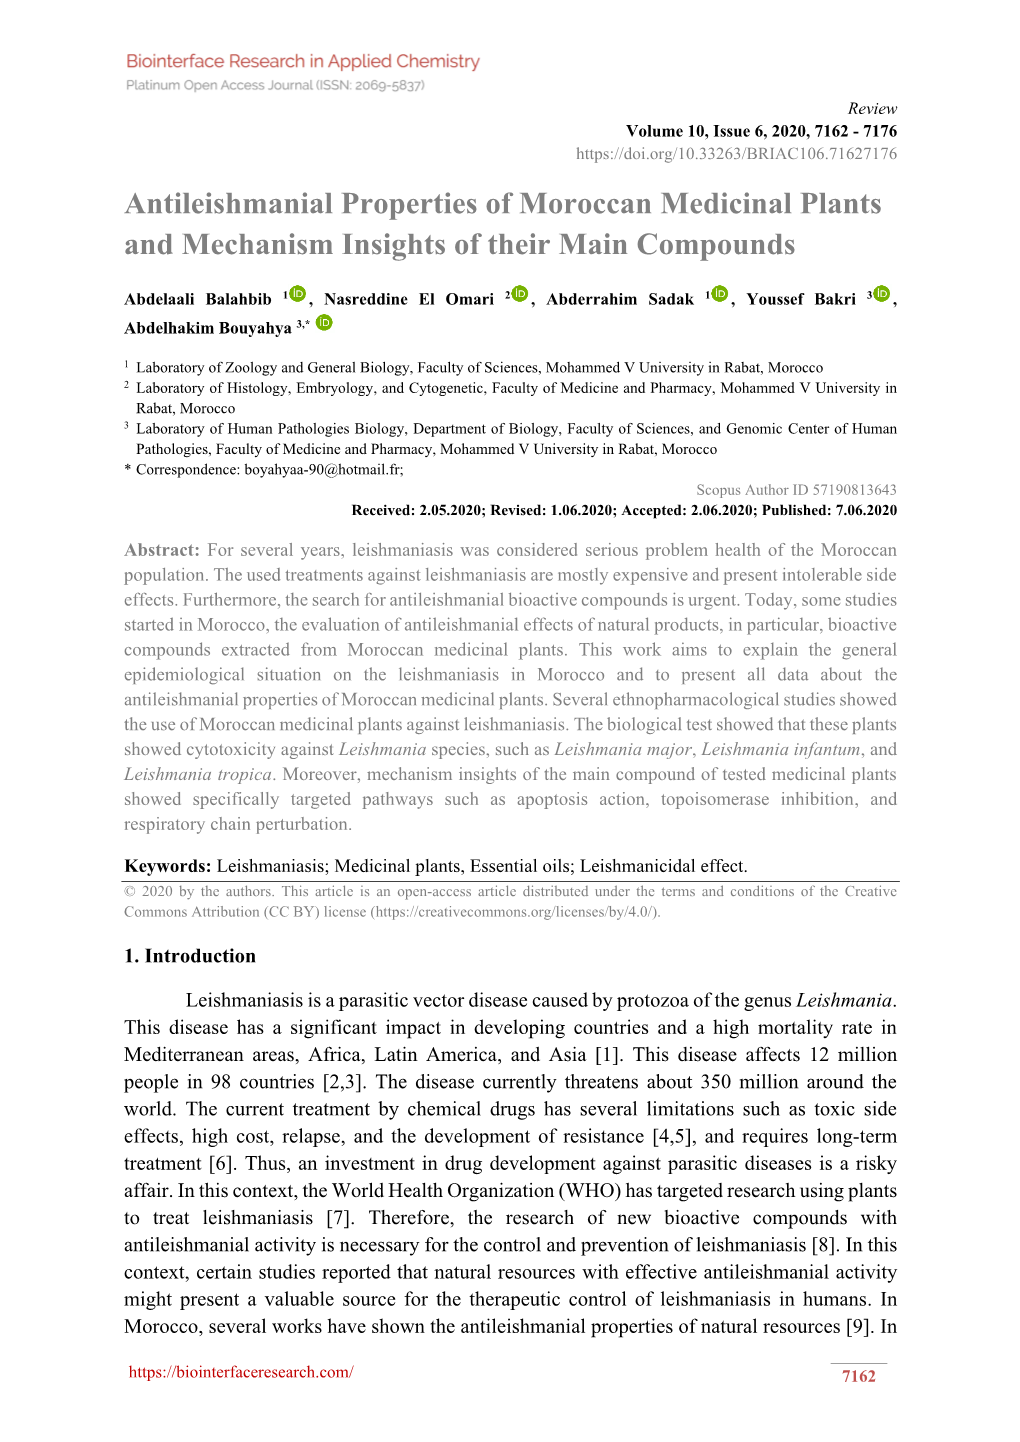 Antileishmanial Properties of Moroccan Medicinal Plants and Mechanism Insights of Their Main Compounds